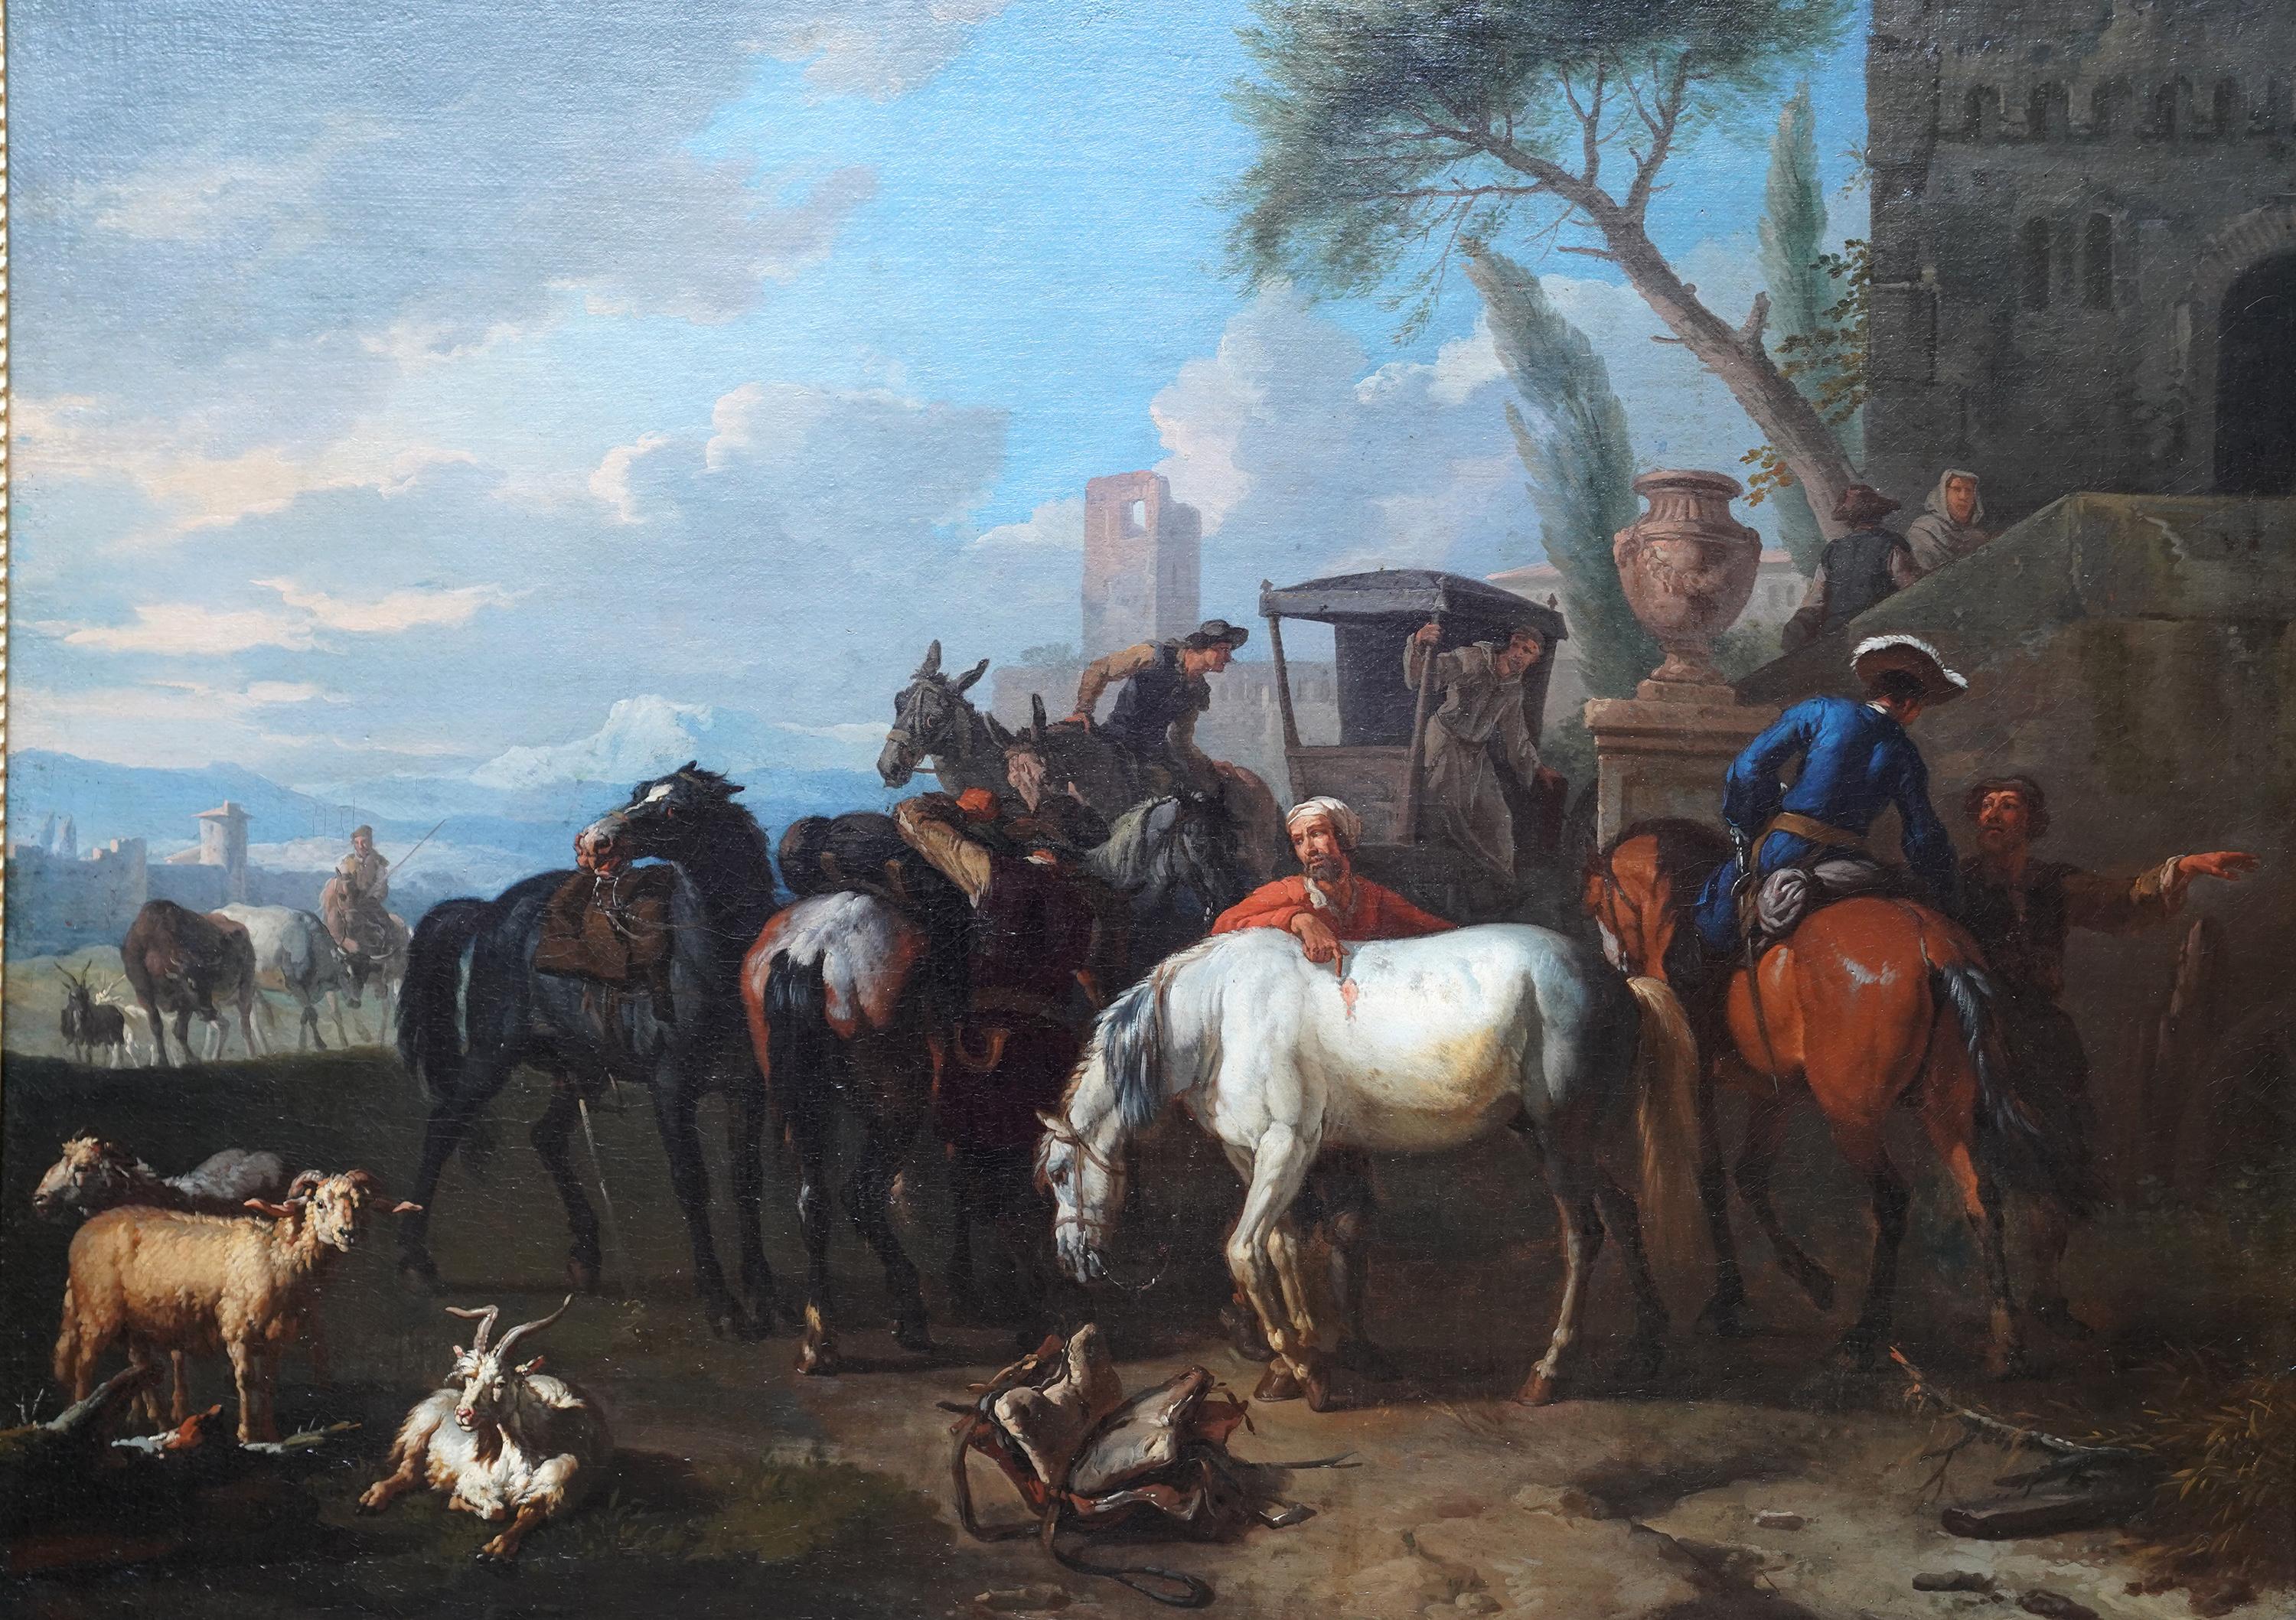 Travellers and Carriage in Landscape Dutch 17th century  Golden Age oil painting - Painting by Pieter Bodding Van Laer